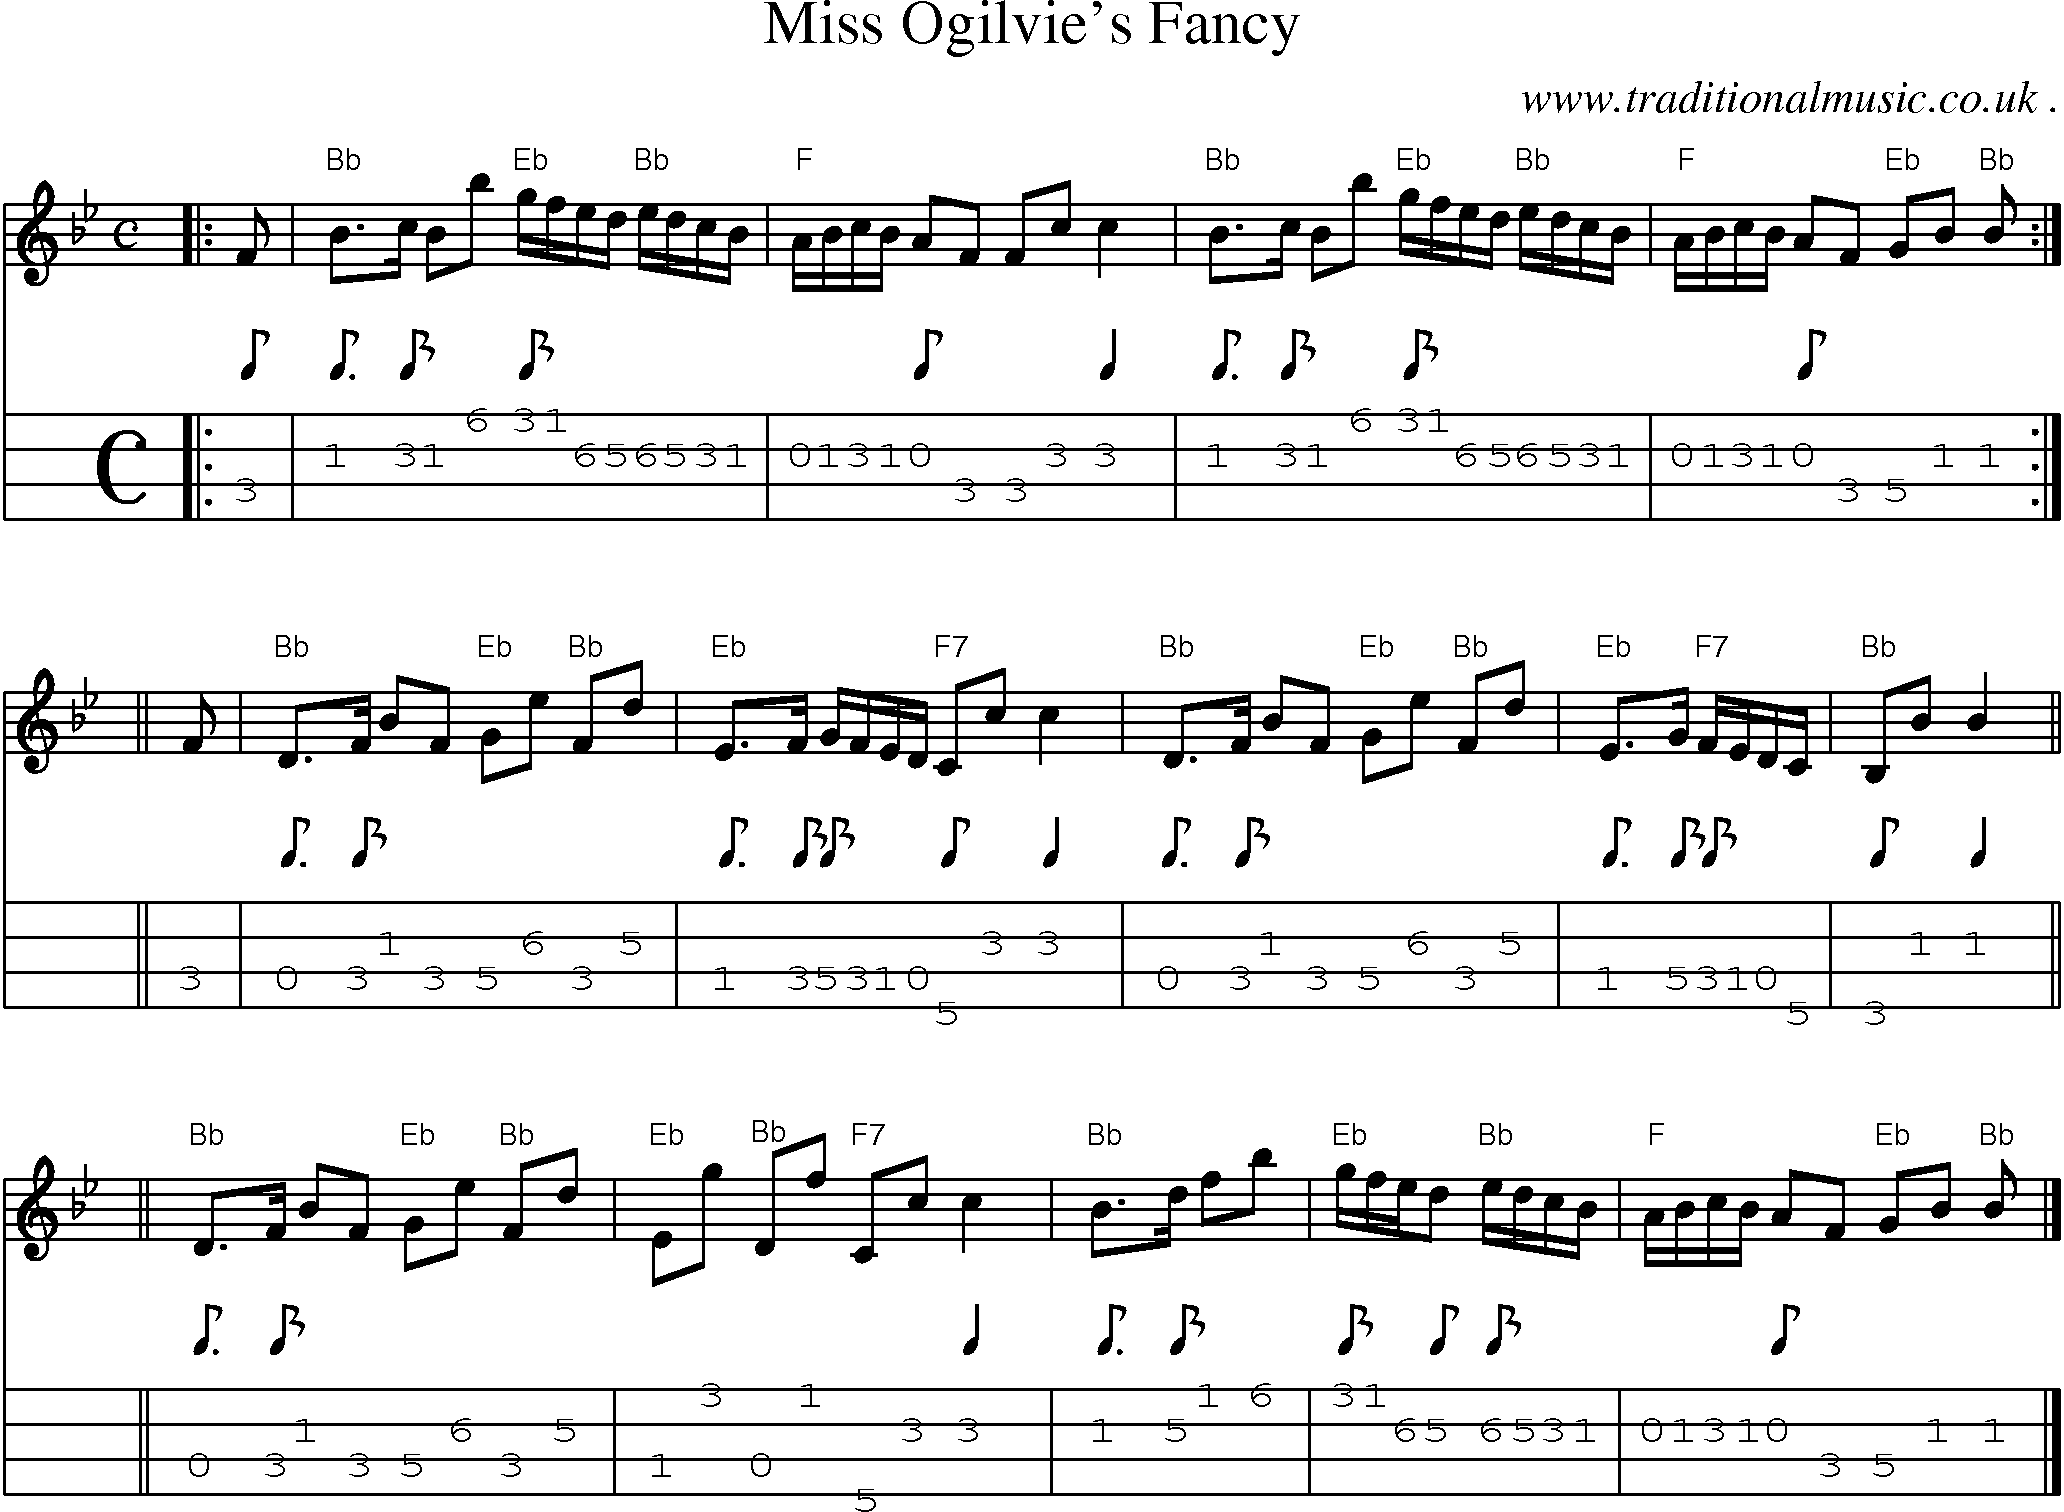 Sheet-music  score, Chords and Mandolin Tabs for Miss Ogilvies Fancy